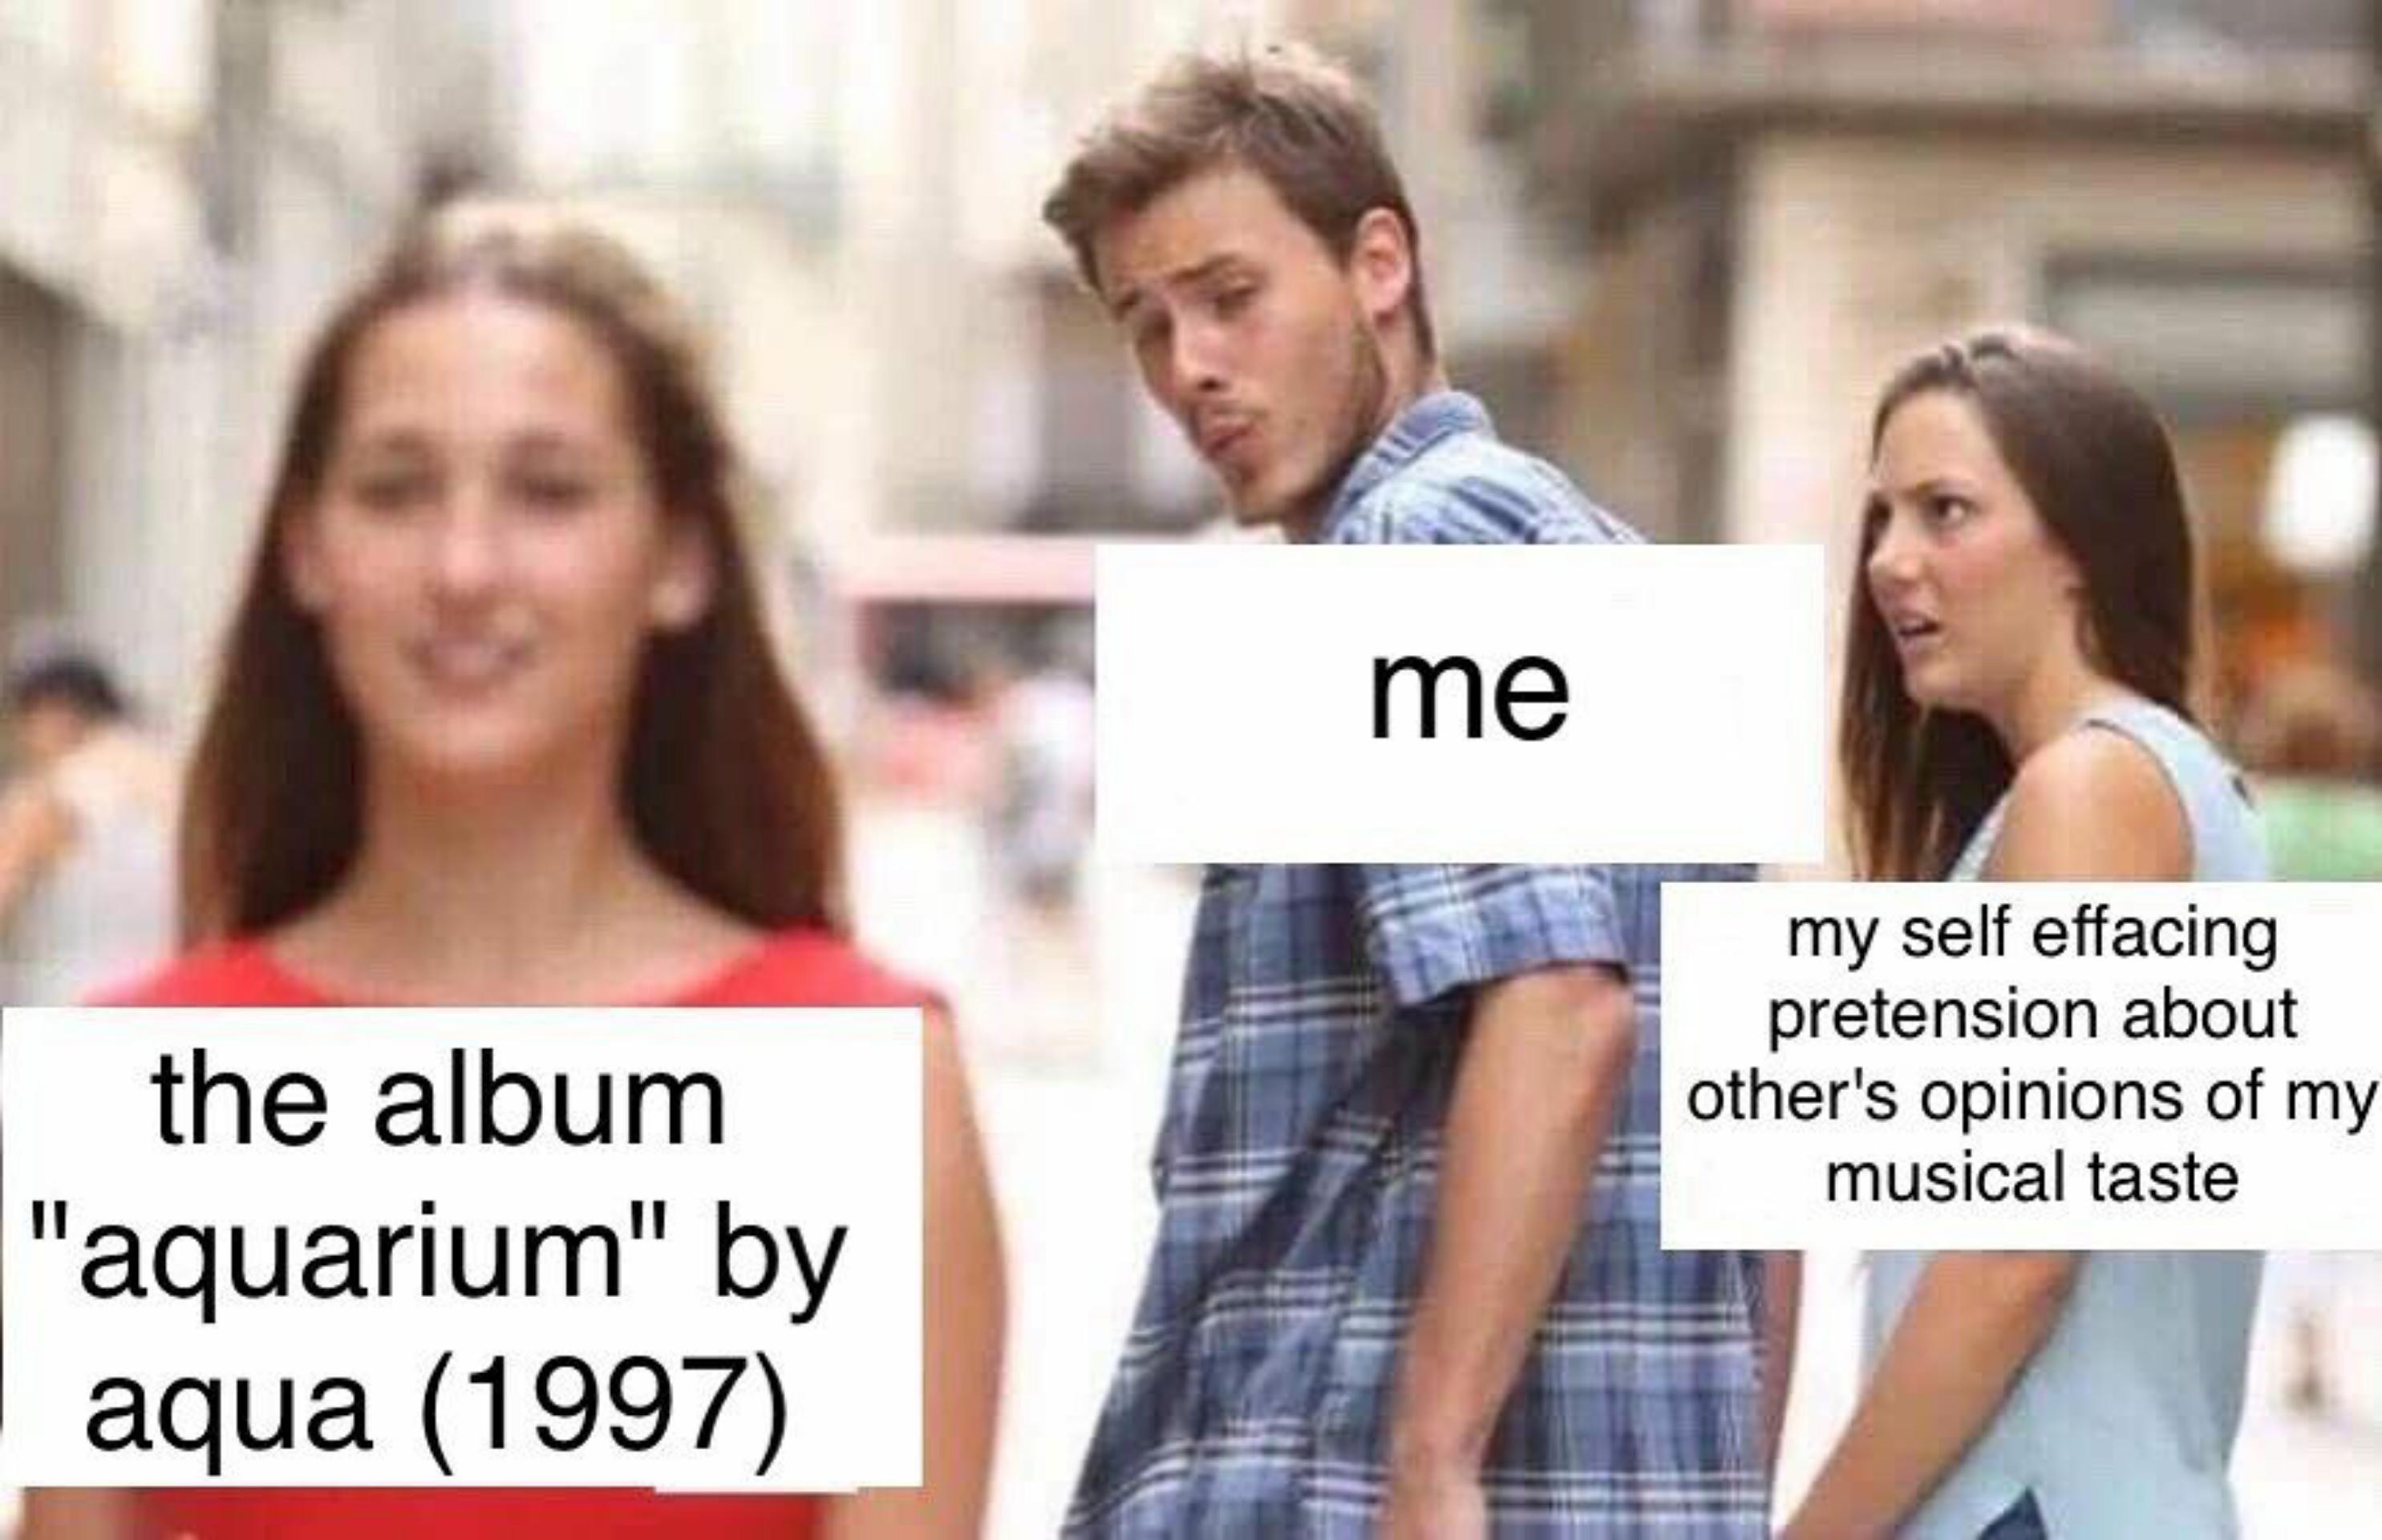 dank memes - distracted boyfriend anime meme - me my self effacing pretension about other's opinions of my musical taste the album "aquarium" by aqua 1997